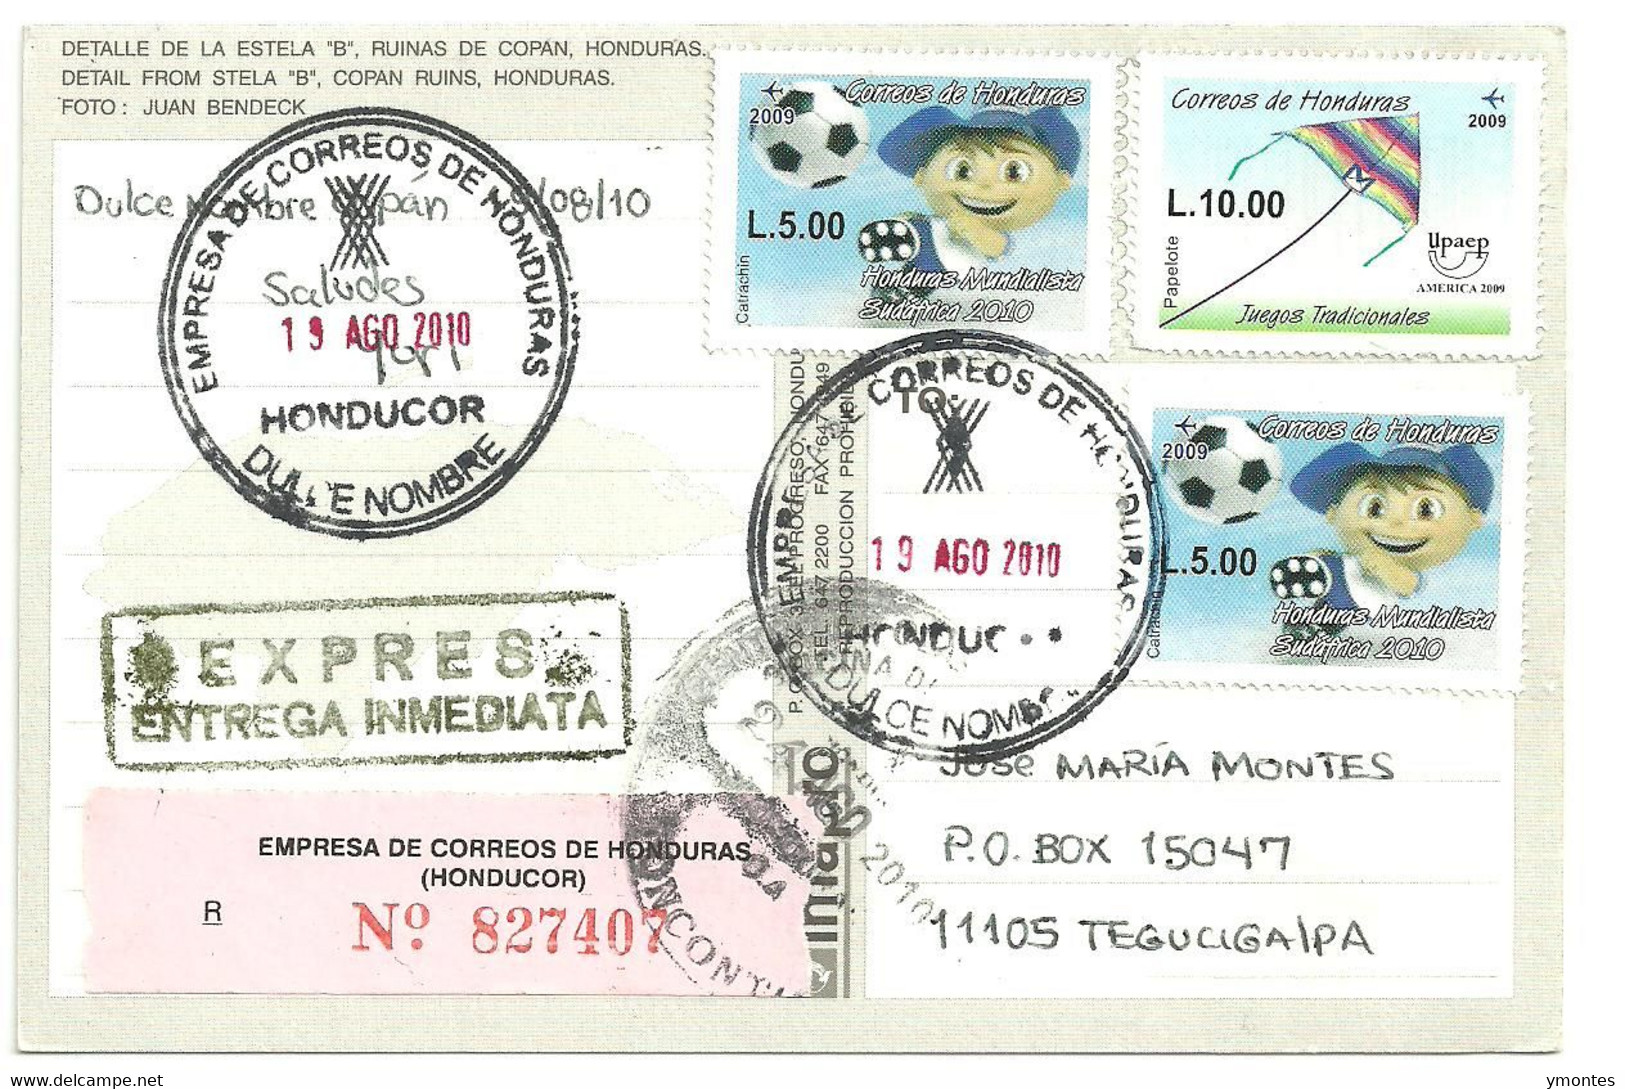 Circulated Dulce Nombre Copan To Tegucigalpa 2010, World Soccer South Africa 2010 Stamp And UPAEP 2009 - Honduras